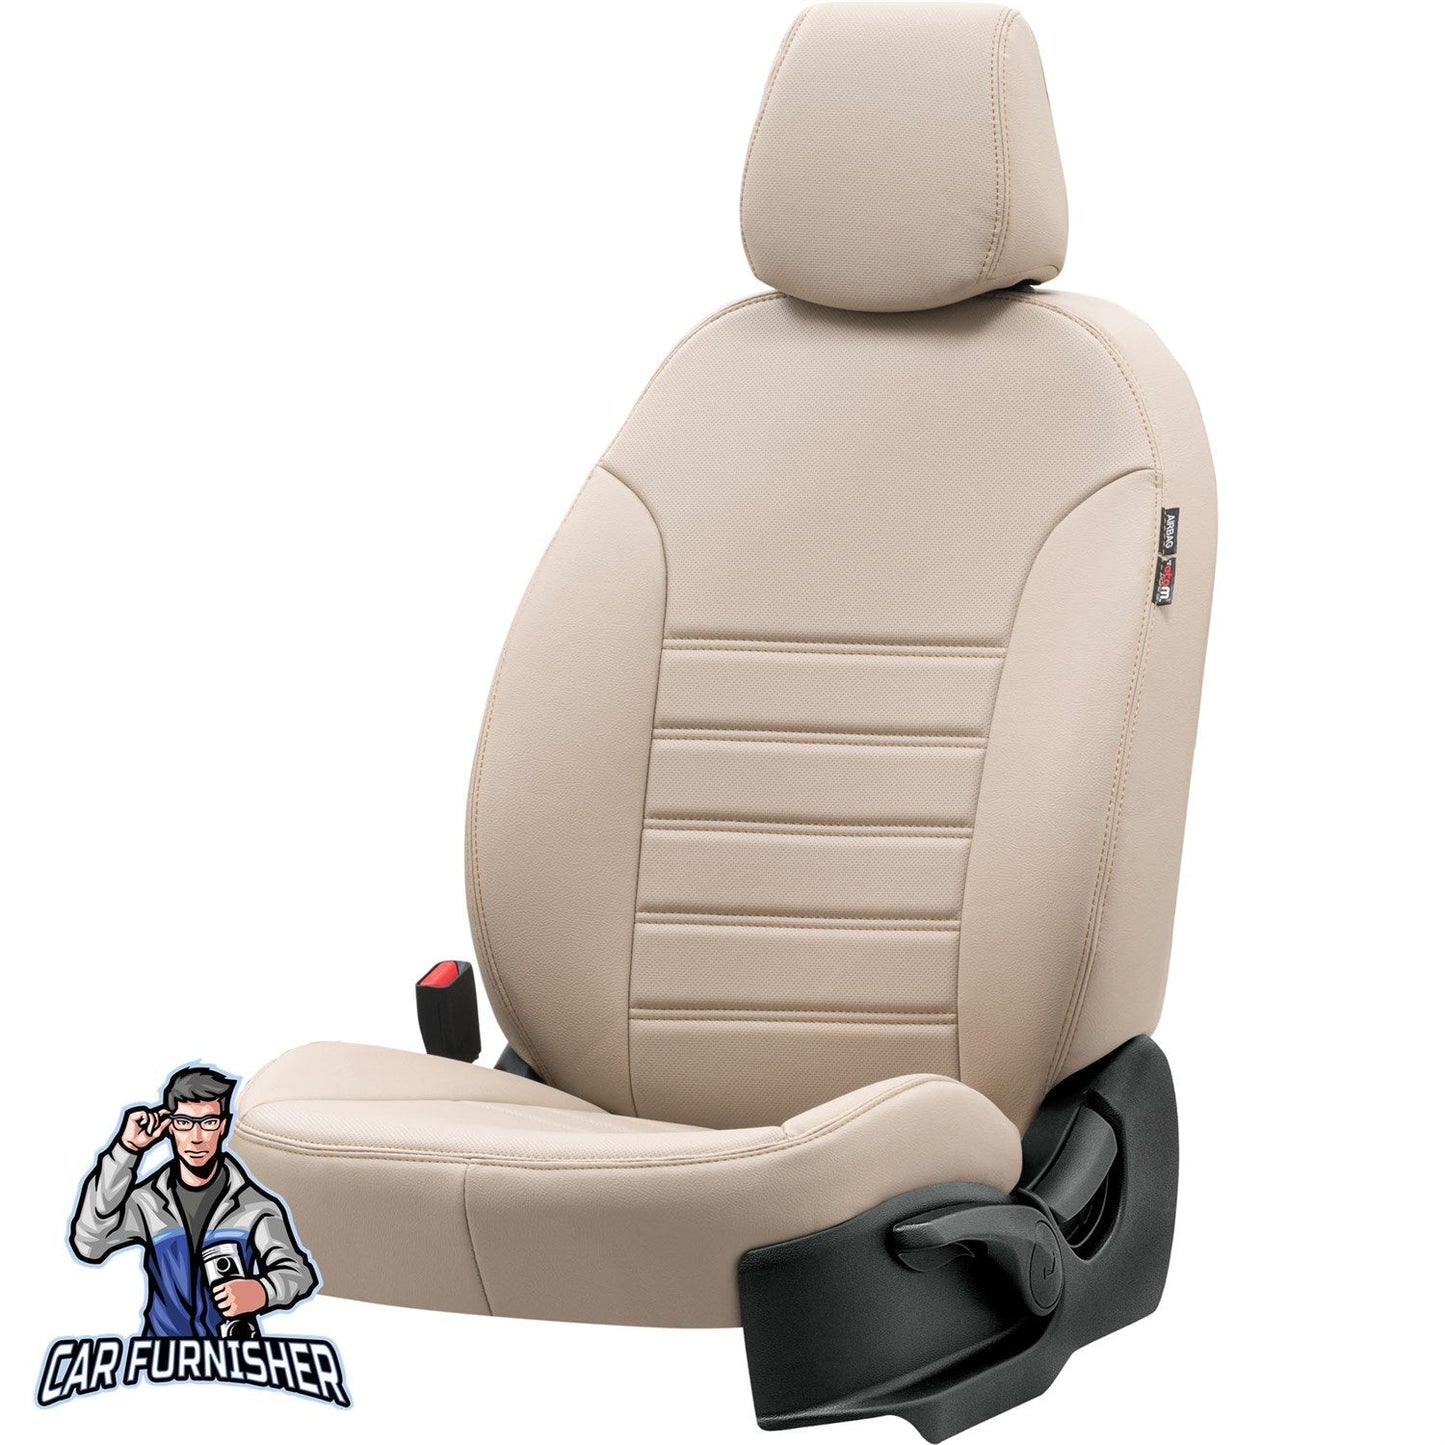 Renault Safrane Seat Covers Istanbul Leather Design Beige Leather